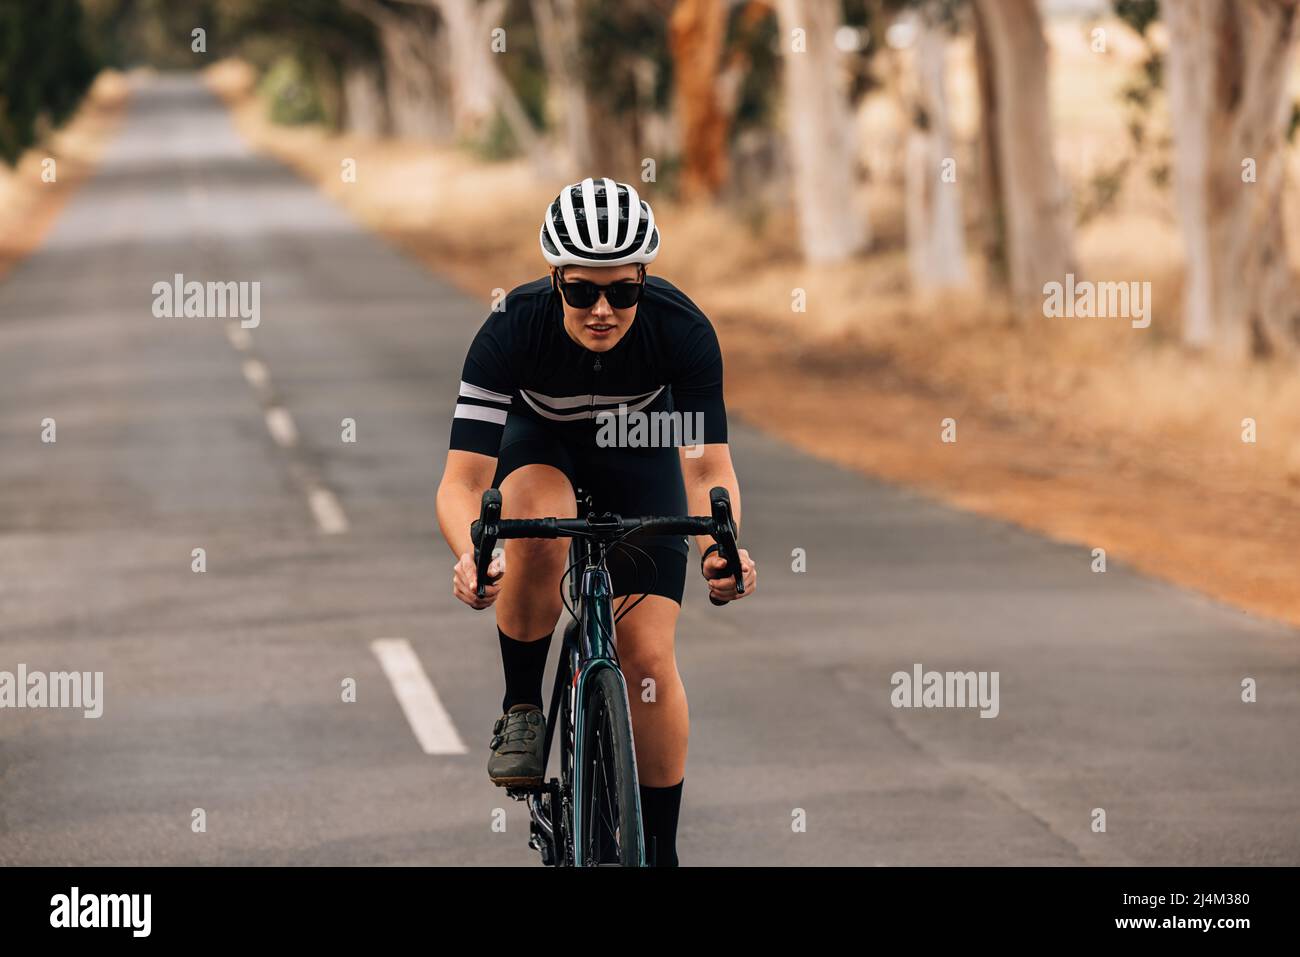 Pro bike female rider wearing helmet and sunglasses training outdoors on empty countryside road Stock Photo